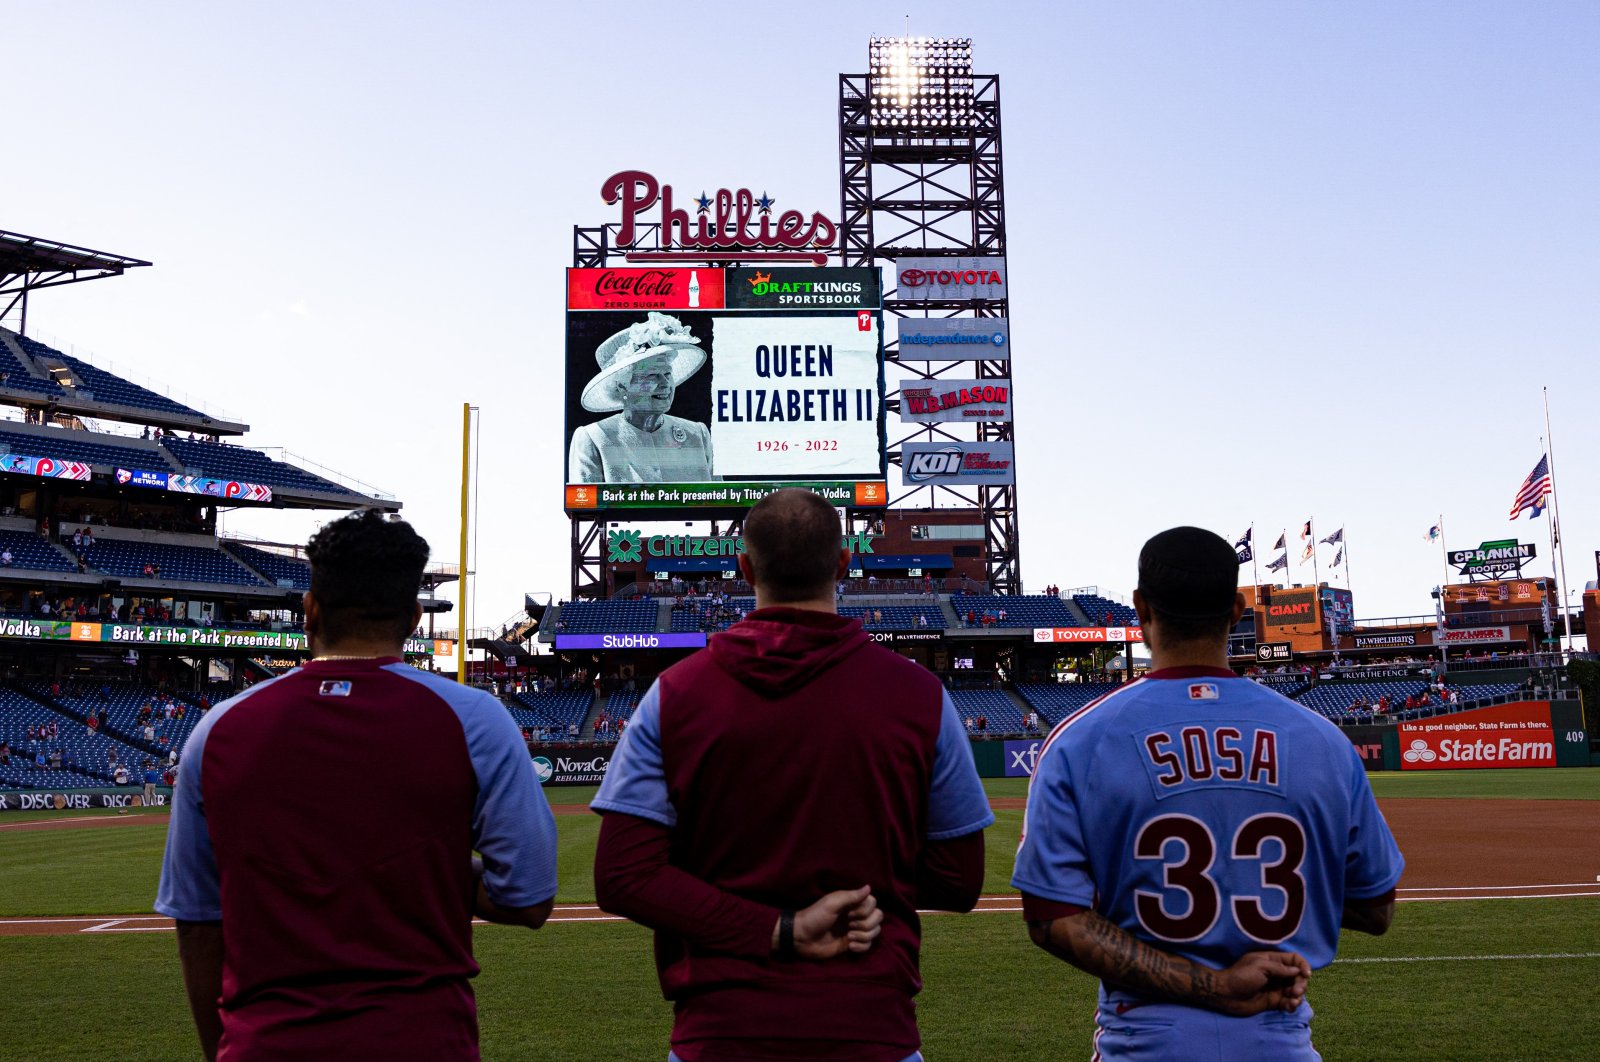 Players and fans stand for a moment of silence before a game between the Philadelphia Phillies and the Miami Marlins, in Philadelphia, United States, Sept. 8, 2022. (REUTERS PHOTO)